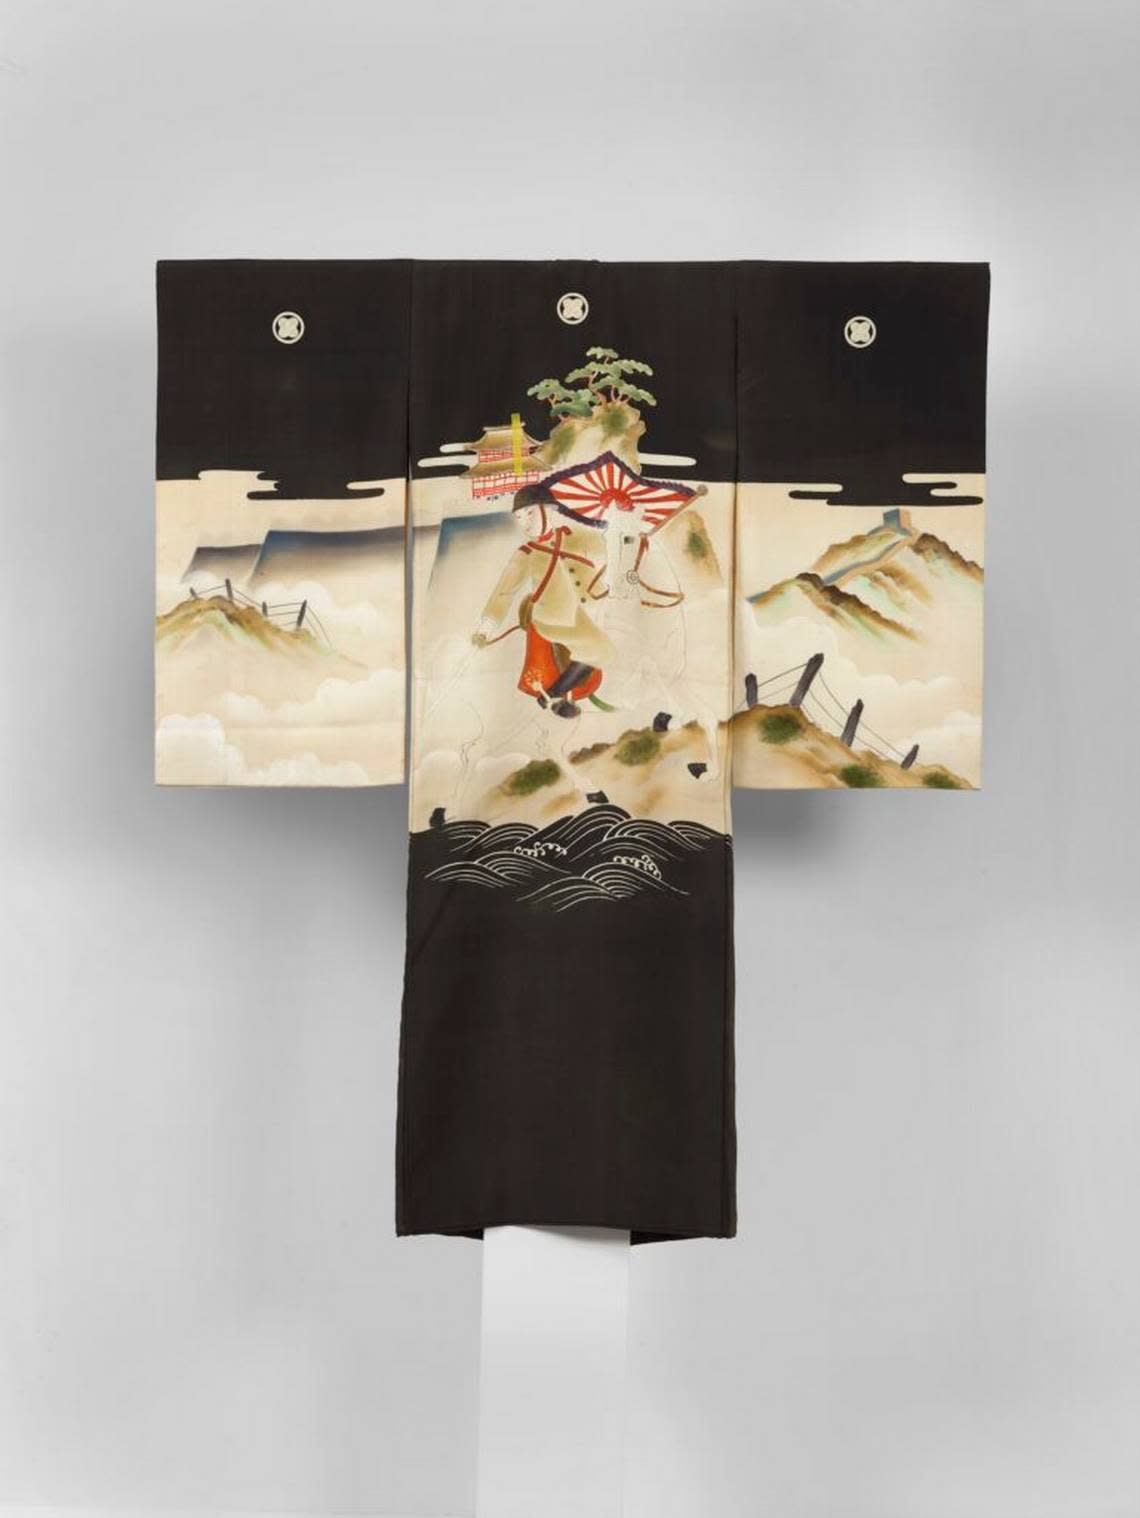 Kimono, Cavalry Officer in China, 1930s Japan. Painted and embroidered silk, metal thread. Gift of Erik Jacobsen at Wolfsonian-FIU.